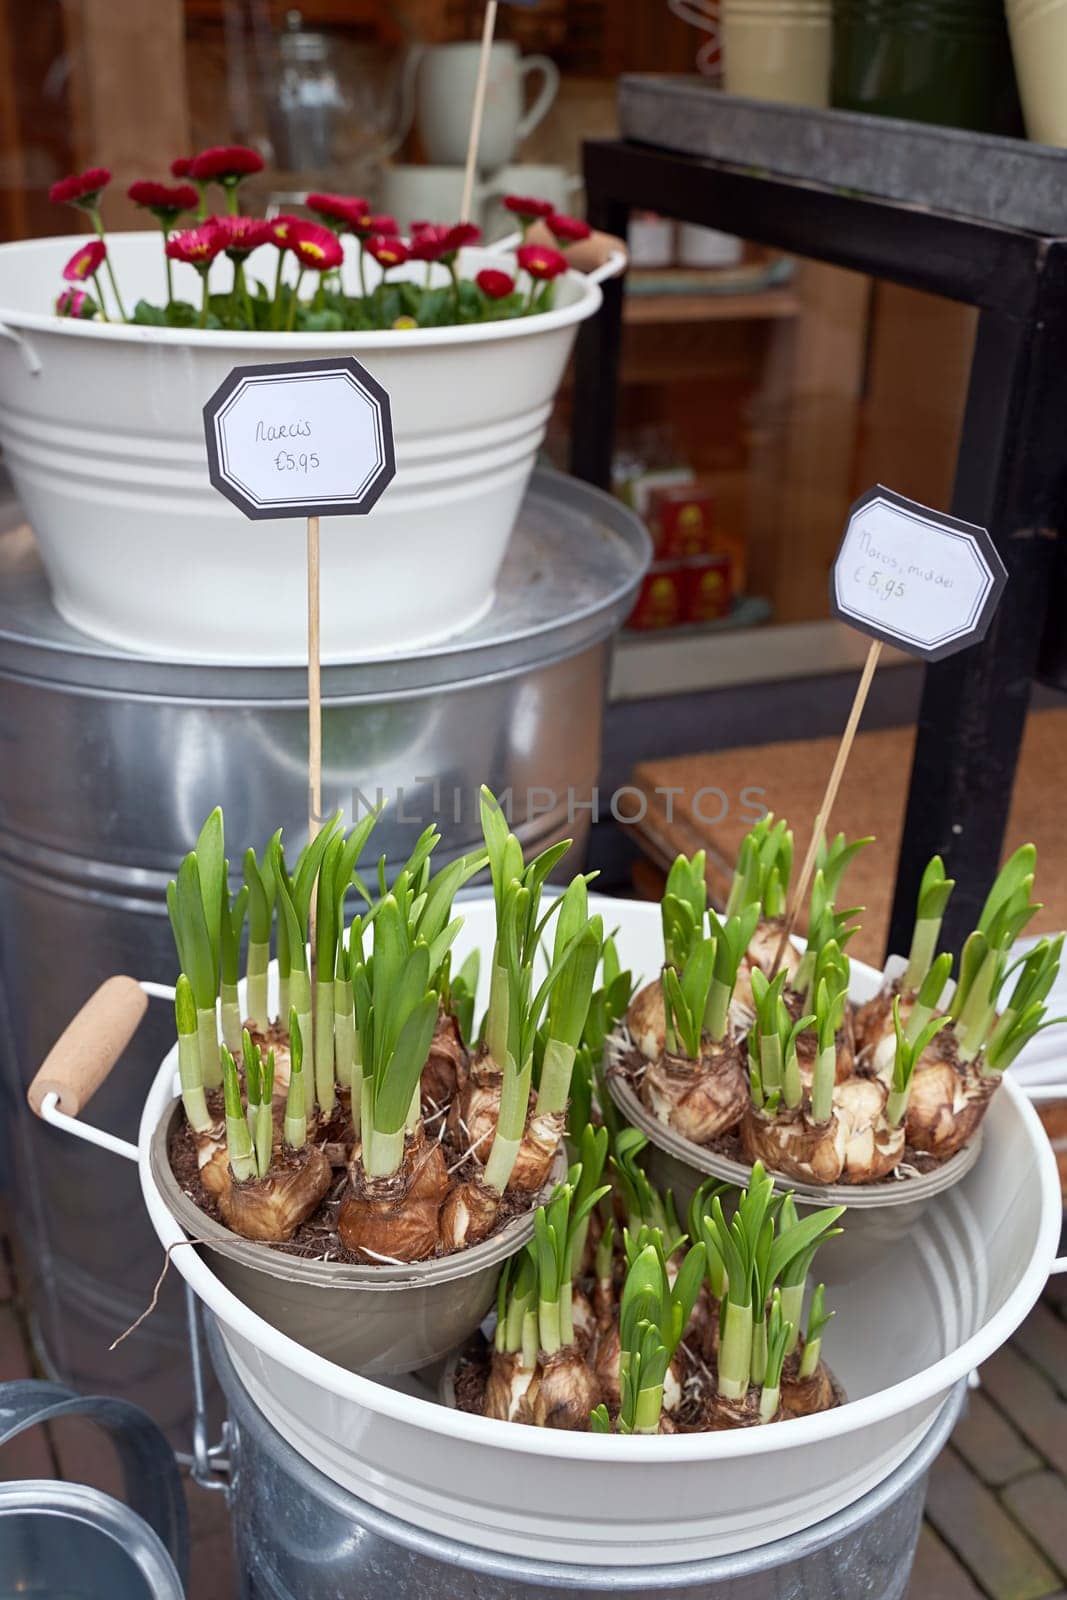 Narcissus aka daffodil shoots or seedlings for sale in a flower shop by berezko